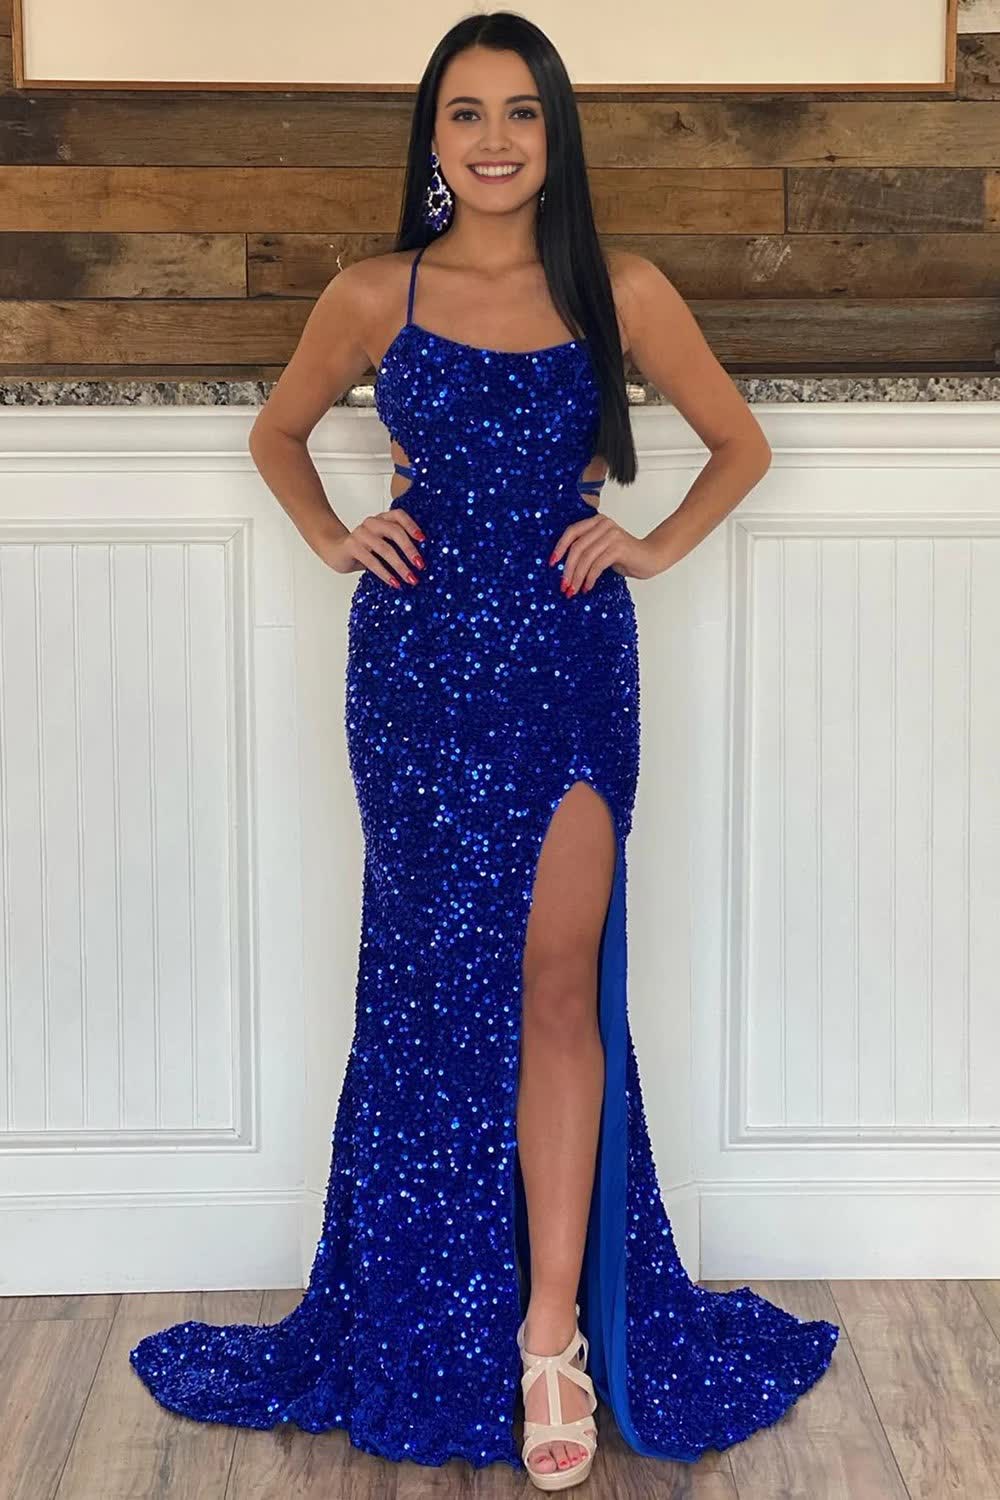 Sparkly Royal Blue Sequins Mermaid Long Corset Prom Dress with Slit Gowns, Sparkly Royal Blue Sequins Mermaid Long Prom Dress with Slit